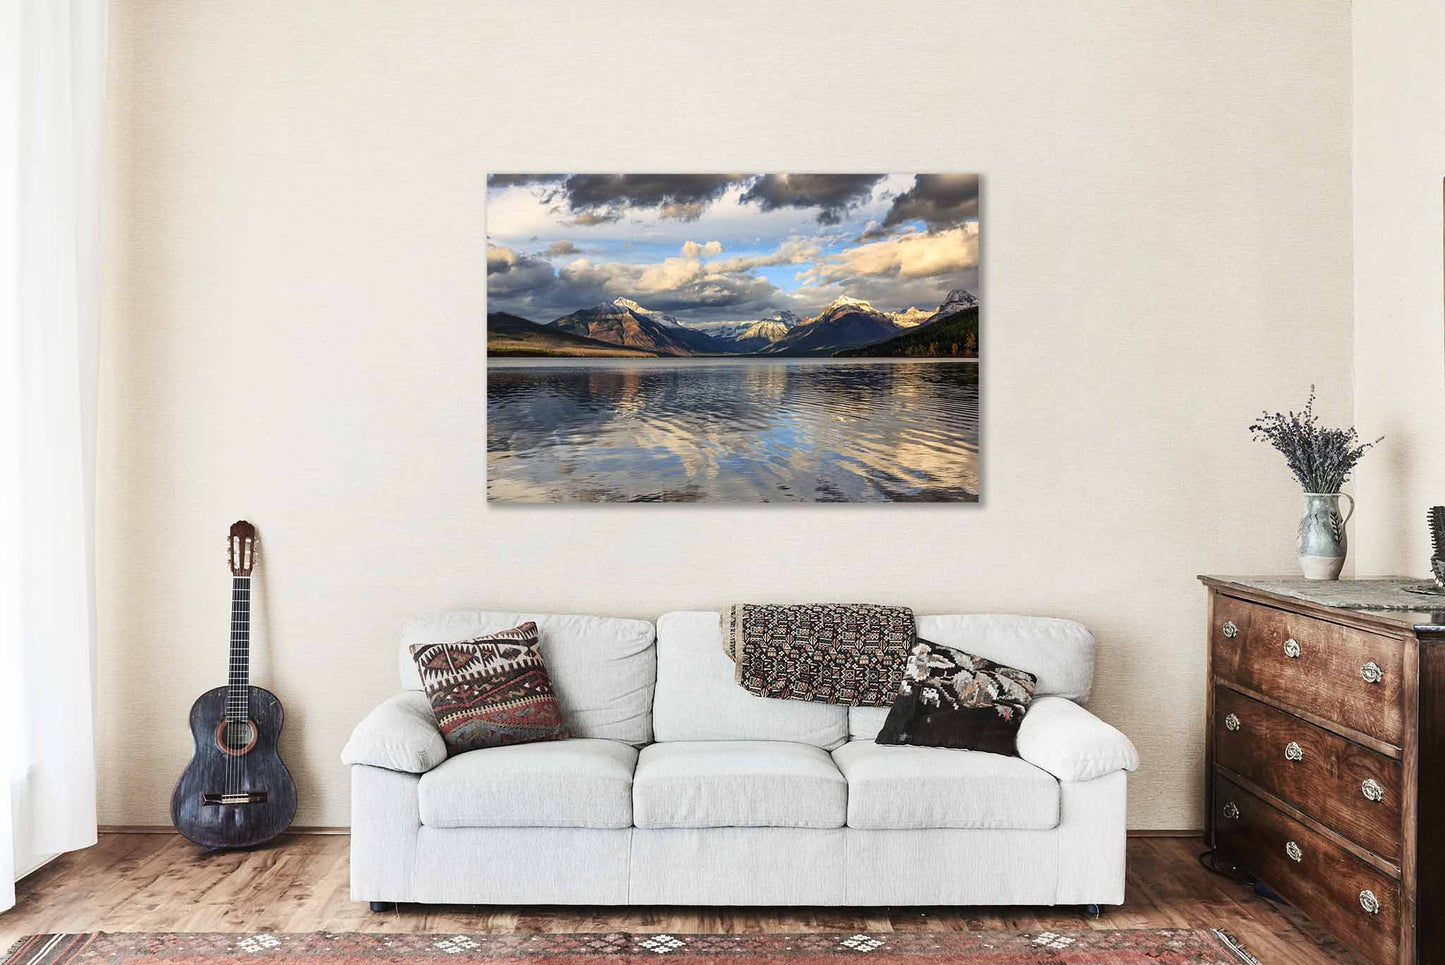 Glacier National Park Canvas Wall Art (Ready to Hang) Gallery Wrap of Snowy Peaks at Lake McDonald on Autumn Day in Montana Rocky Mountain Photography Nature Decor